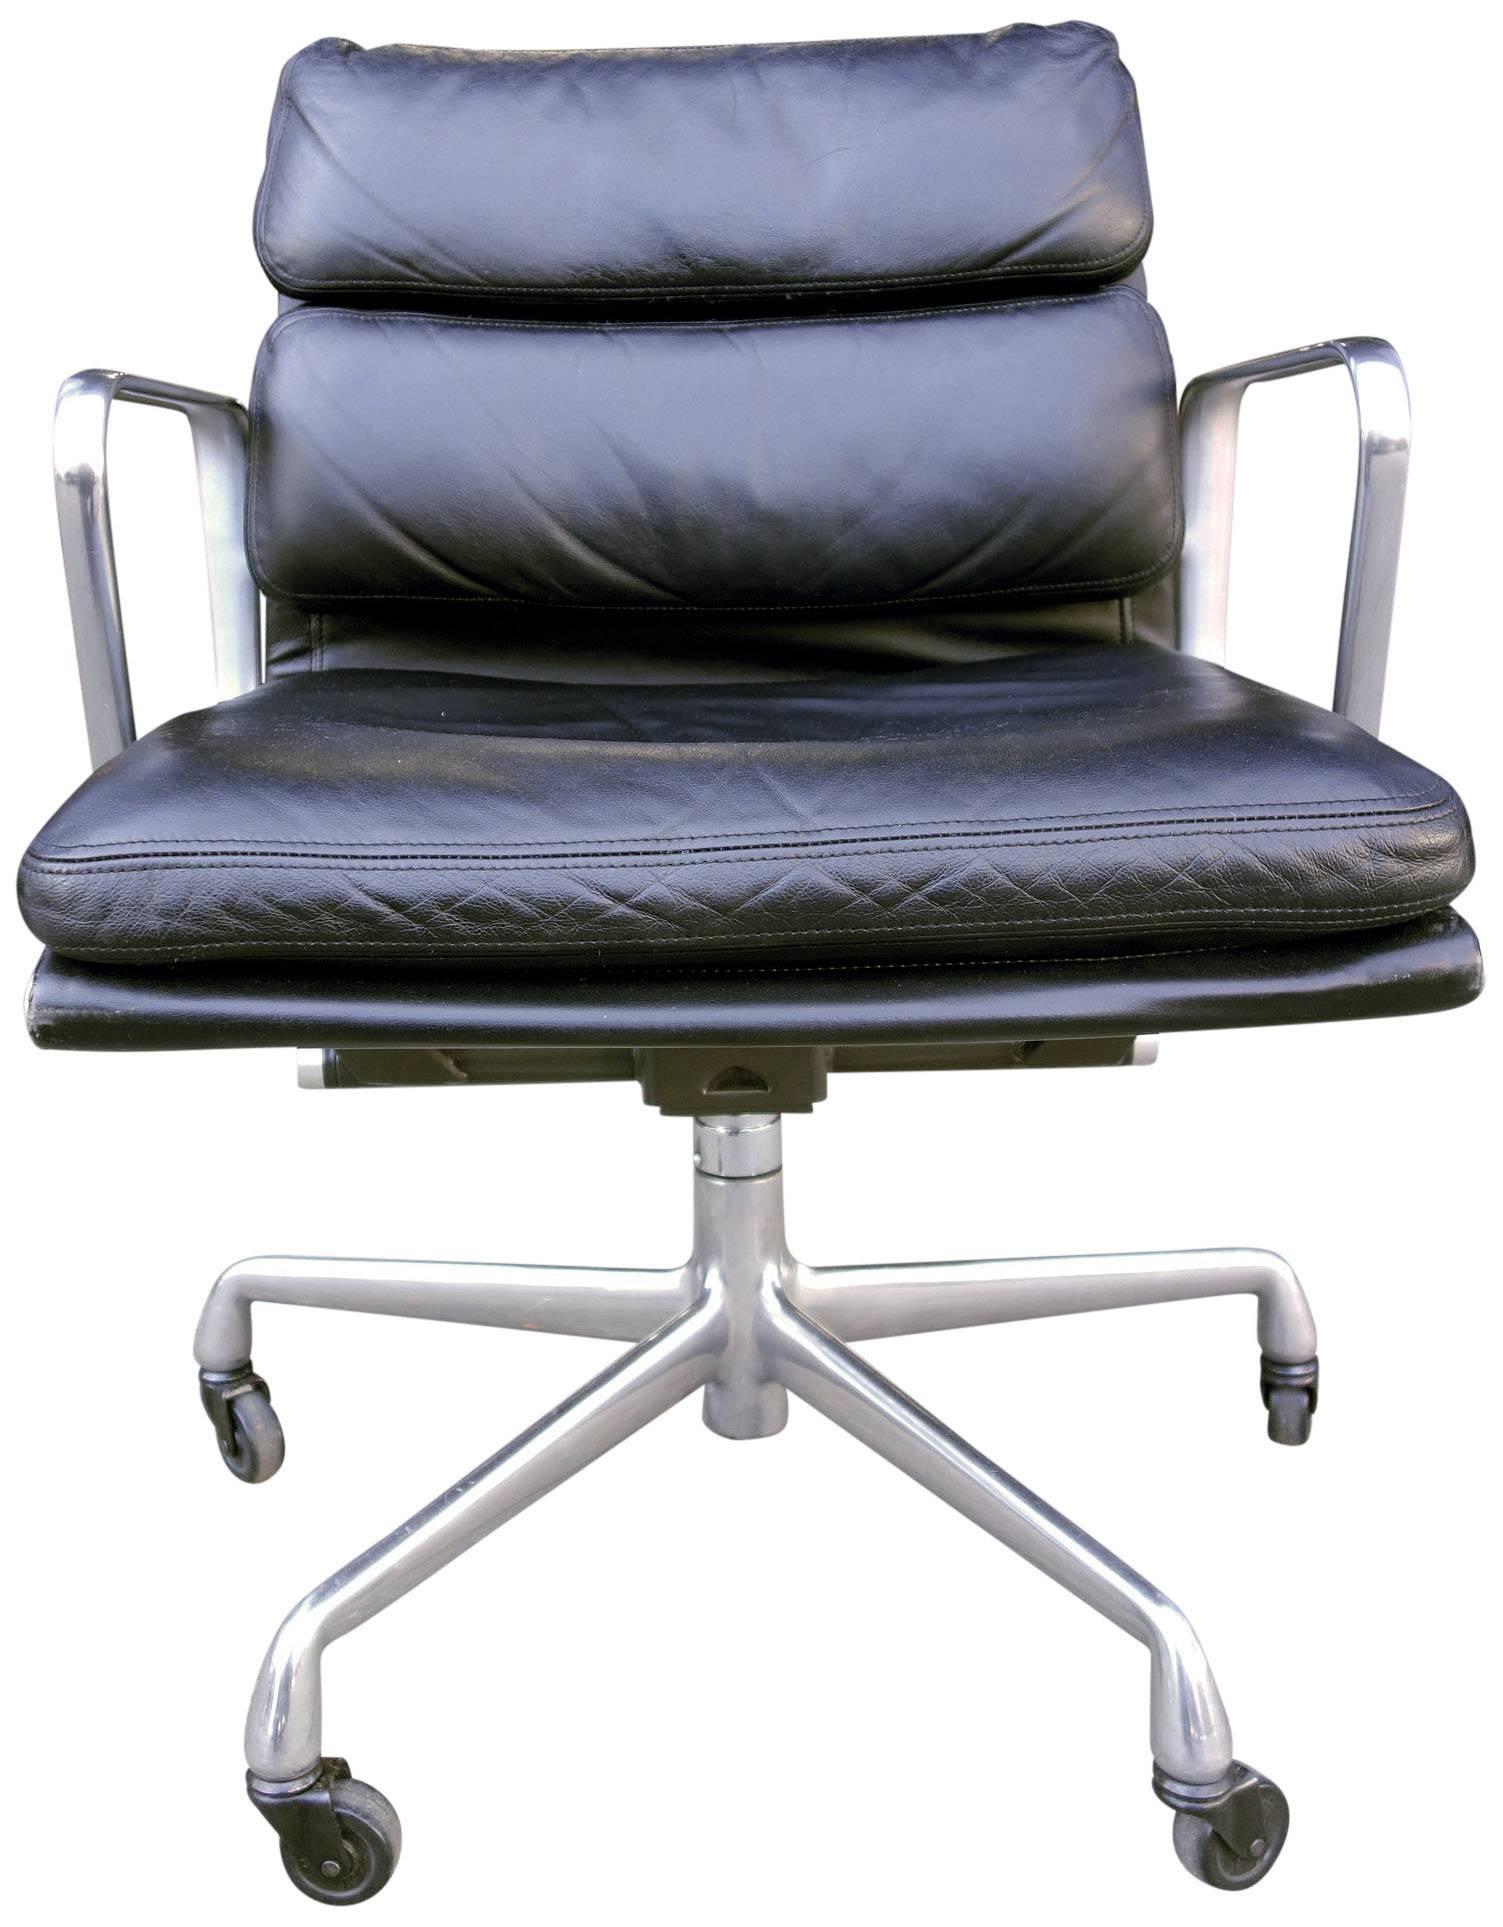 For your consideration are these Eames for Herman Miller vintage soft pad chairs in black leather with low backs. 

These authentic vintage examples are icons of Mid-Century Modern design. The chairs part of the Eames aluminium group designed for